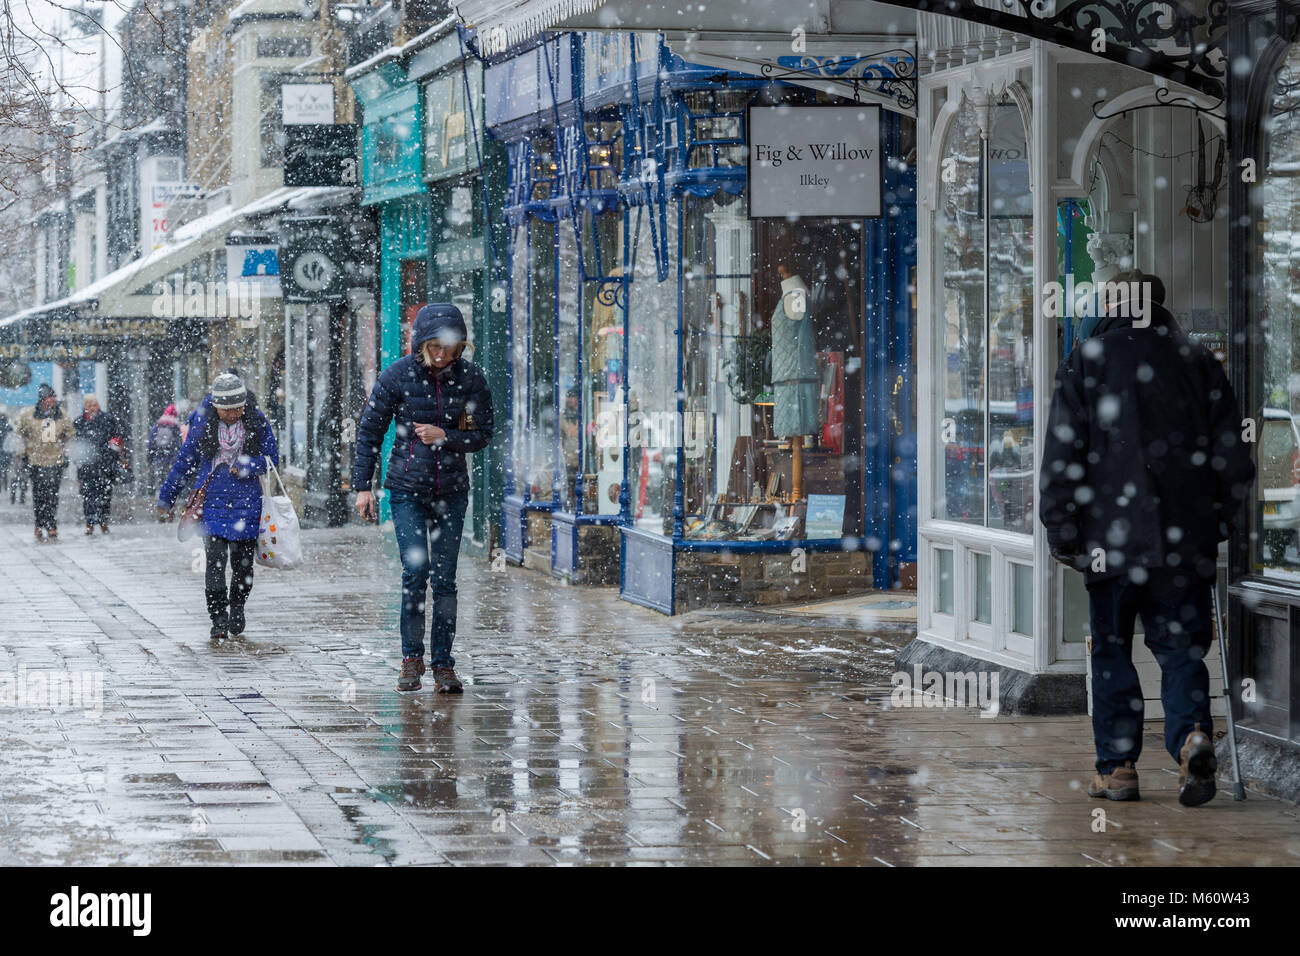 Ilkley, West Yorkshire. 27th Feb, 2018. UK Weather: People in Ilkley,  heads bowed, dressed in winter clothing with hoods up or wearing hats, brave the falling snow whilst walking past shops on The Grove. 27th February 2018, Ilkley, UK Credit: Ian Lamond/Alamy Live News Stock Photo